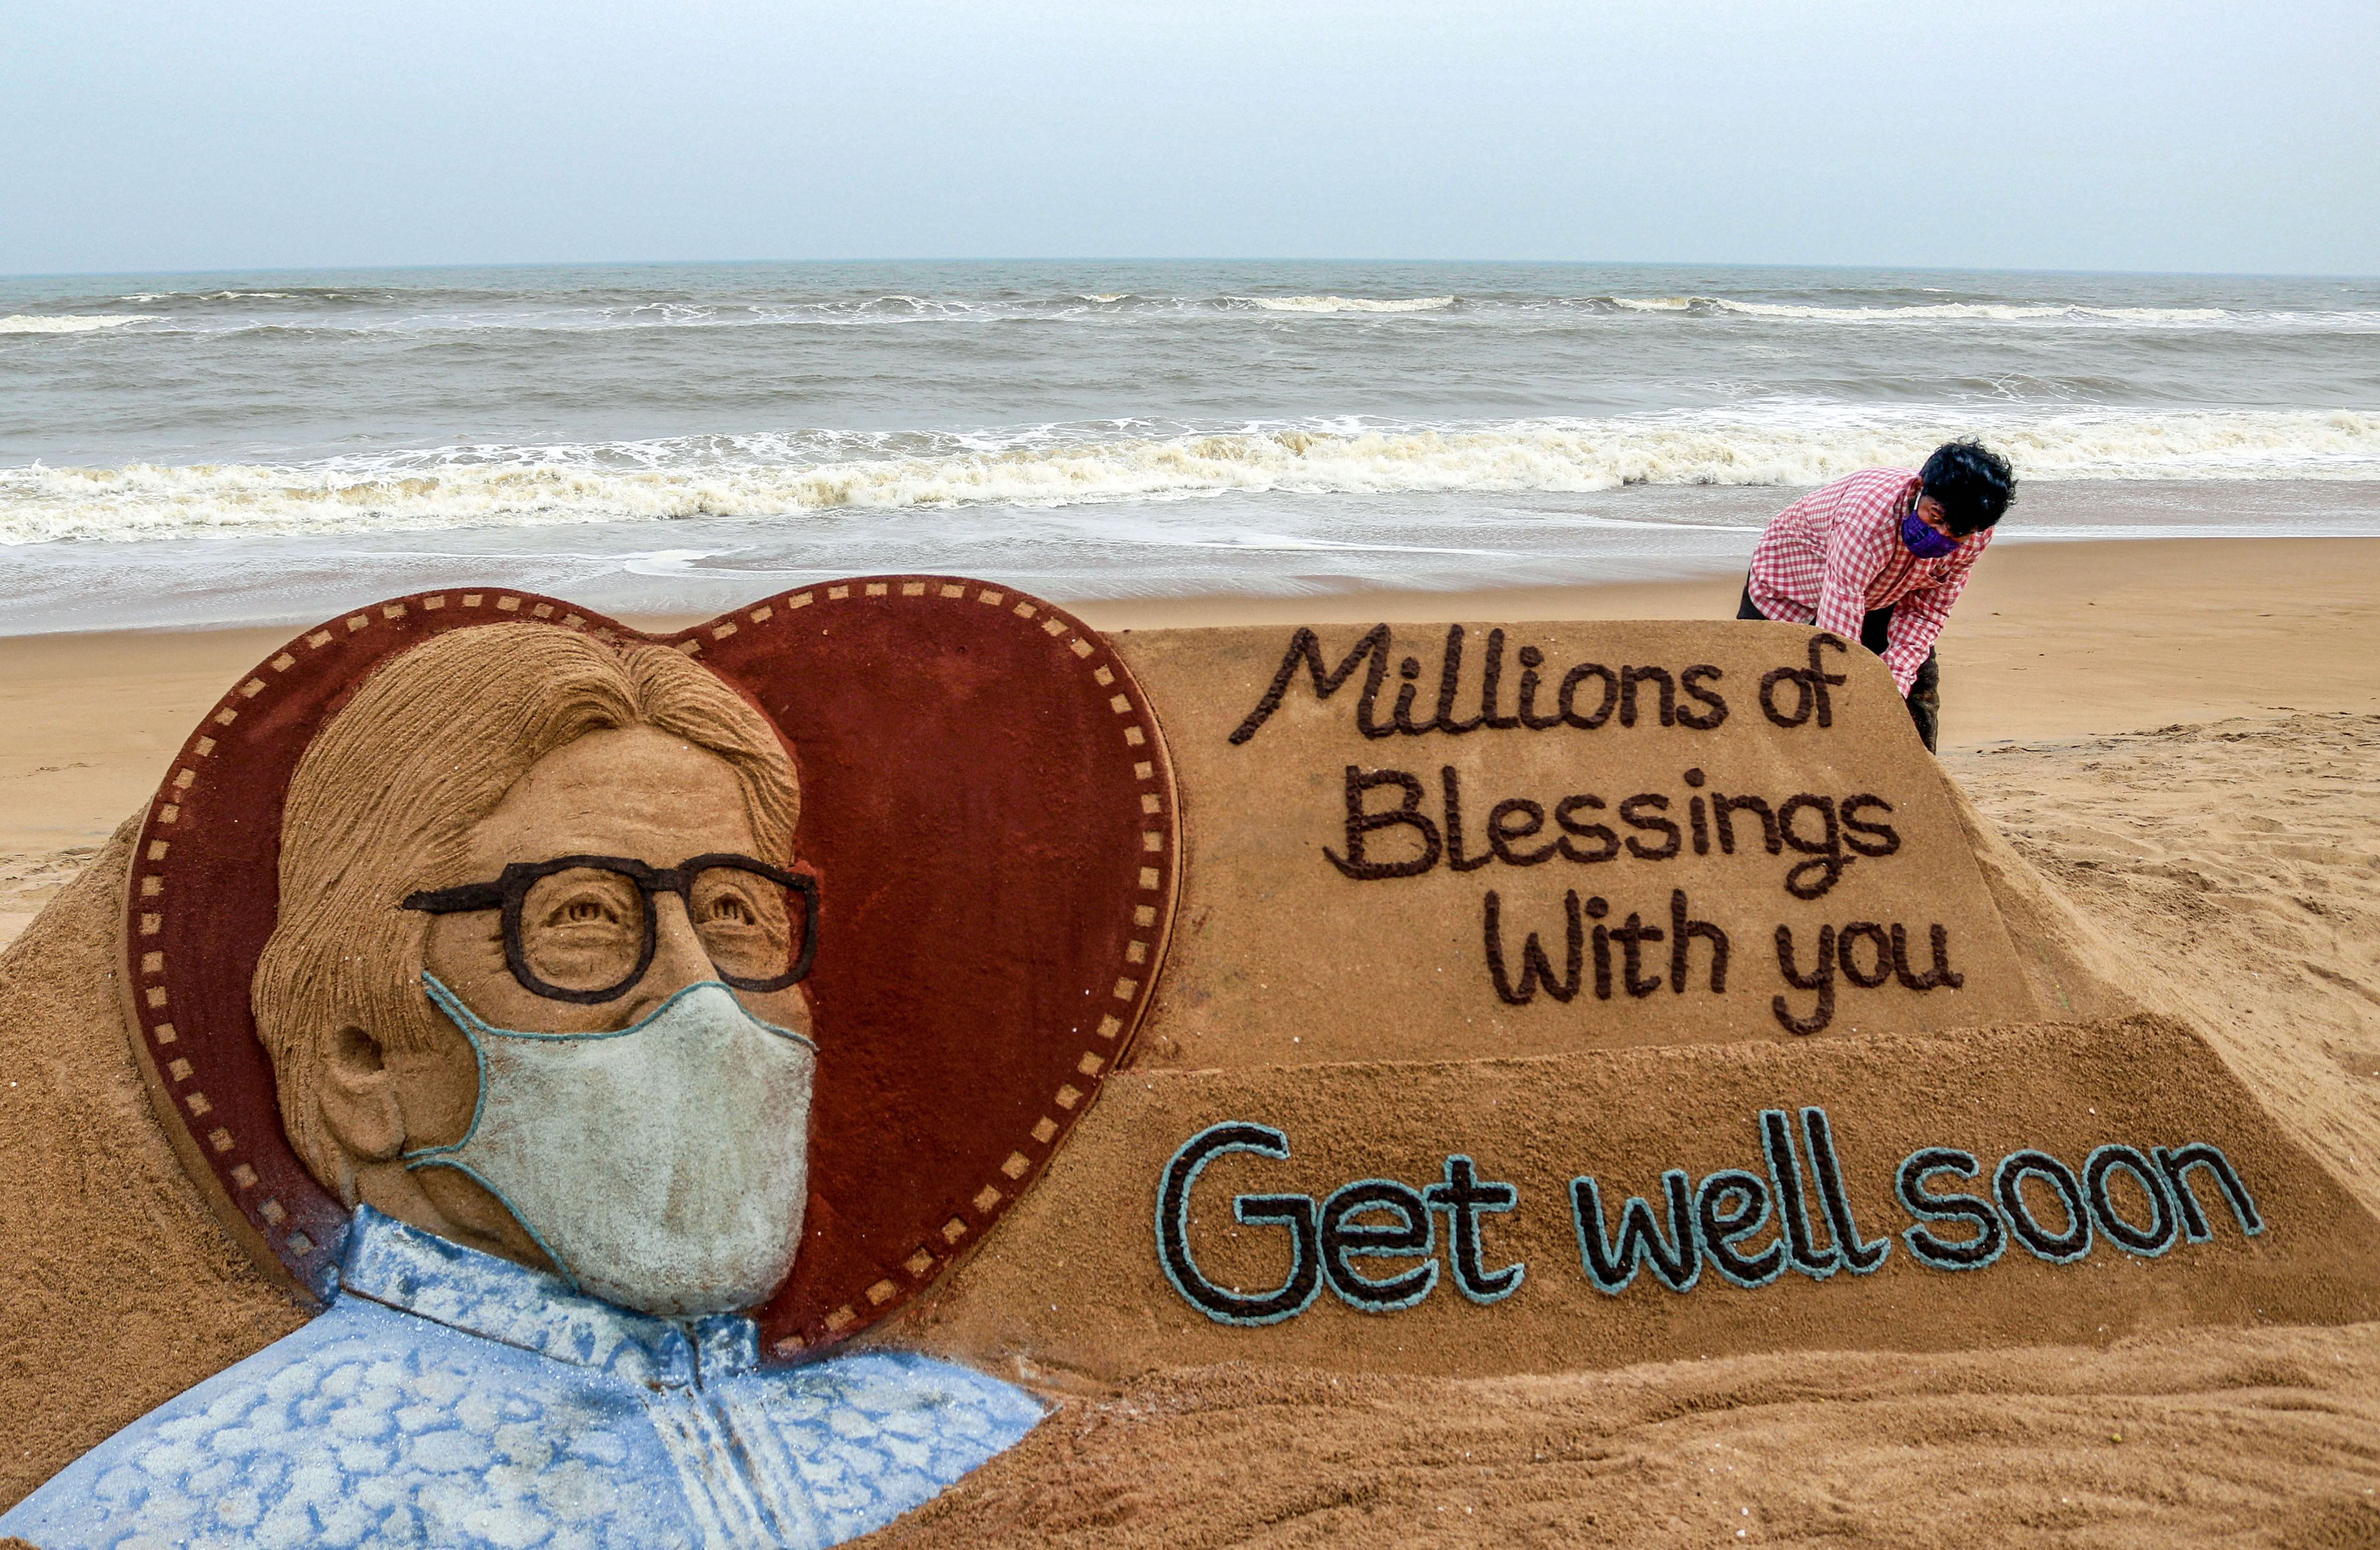 Sand artist Sudarsan Pattnaik gives a final touch to a sand sculpture of Bollywood actor Amitabh Bachchan for his speedy recovery from Covid-19, at Puri beach, Sunday, July 12, 2020. (PTI Photo)